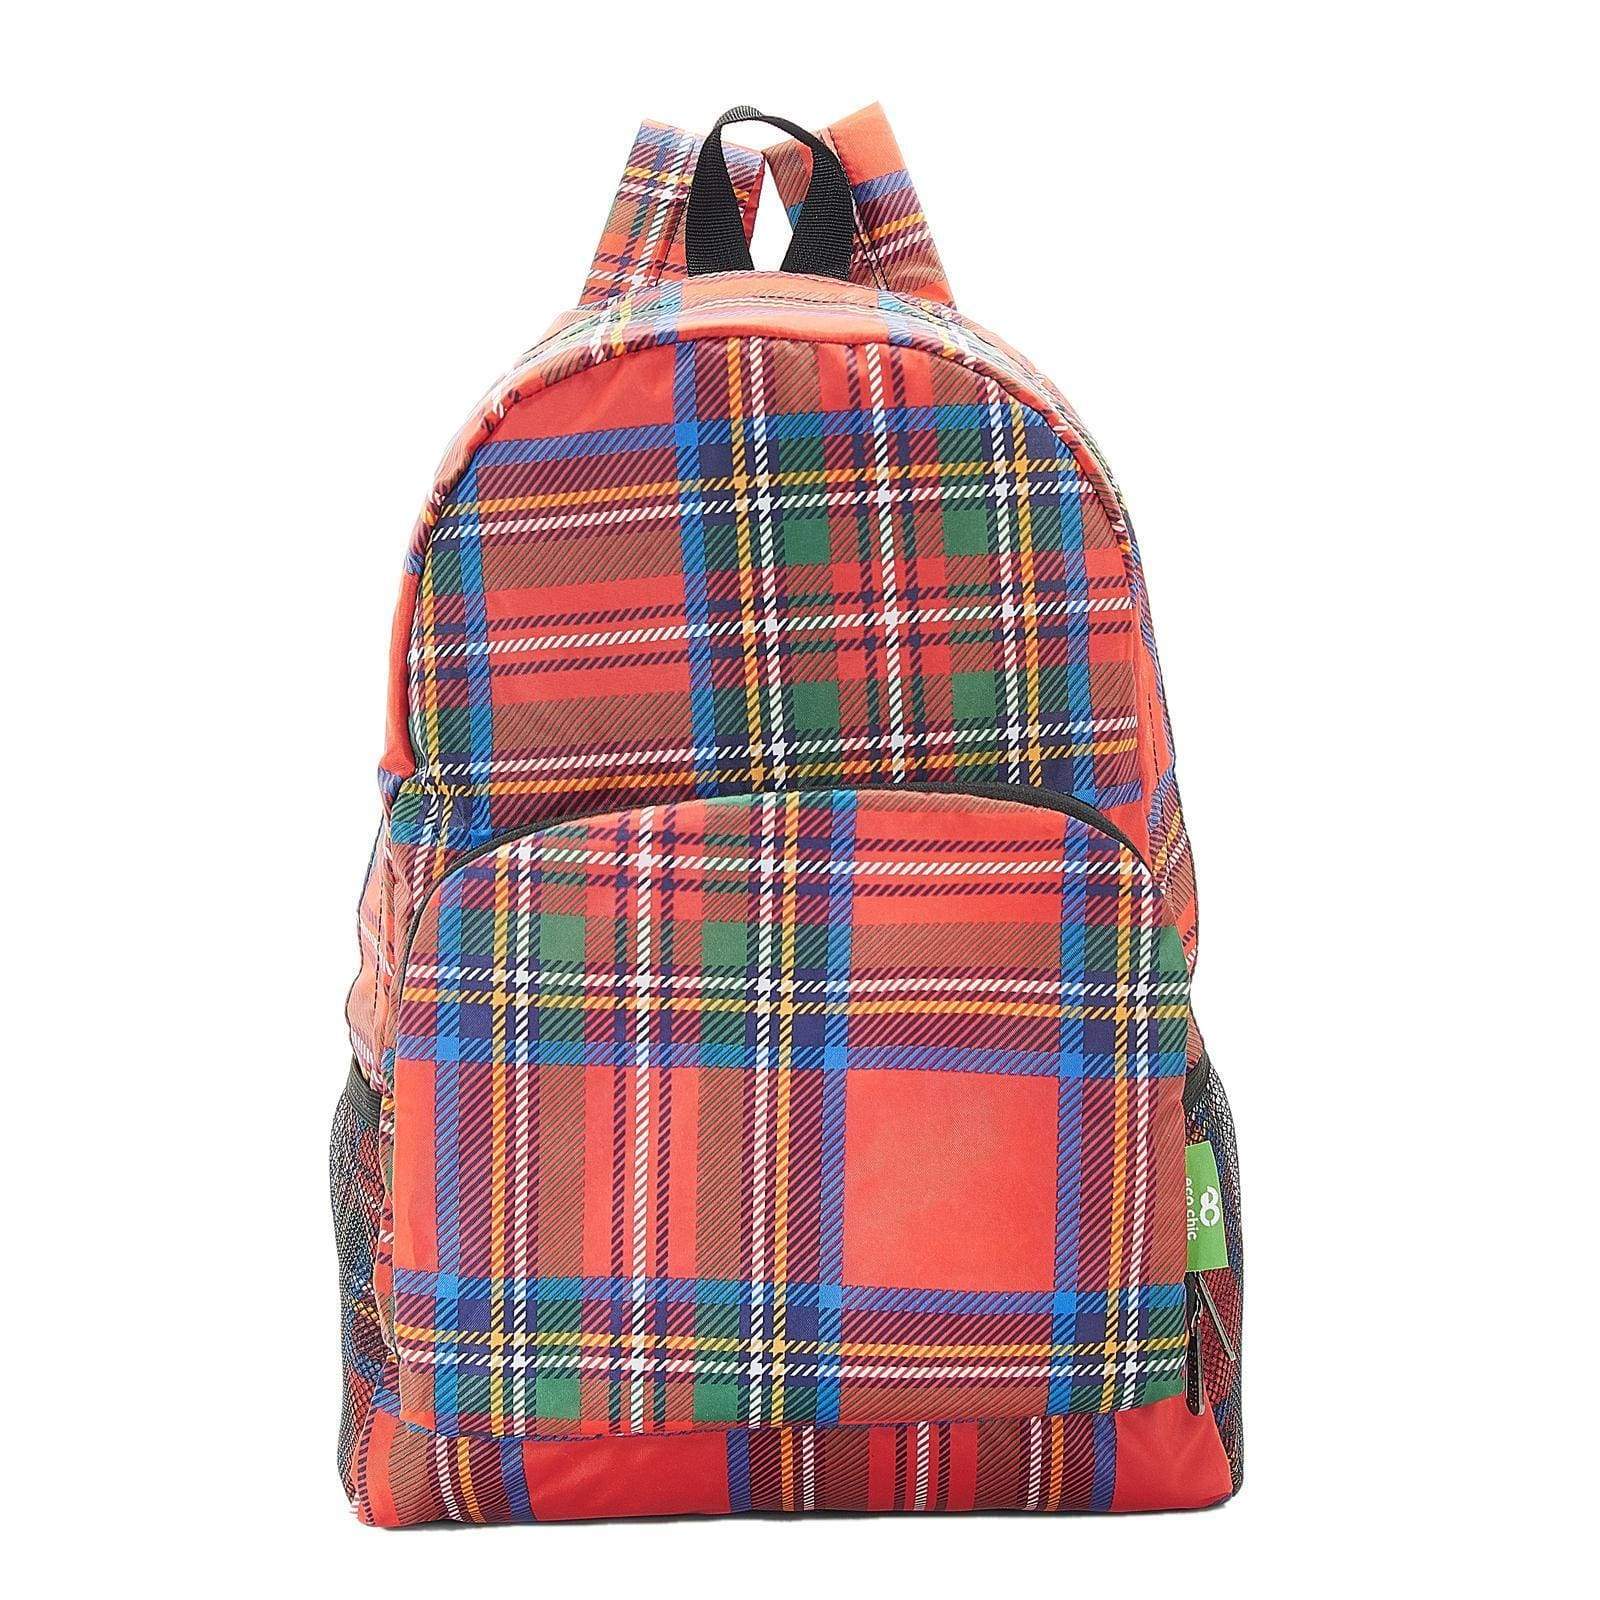 Eco Chic Red Eco Chic Lightweight Foldable Backpack Tartan